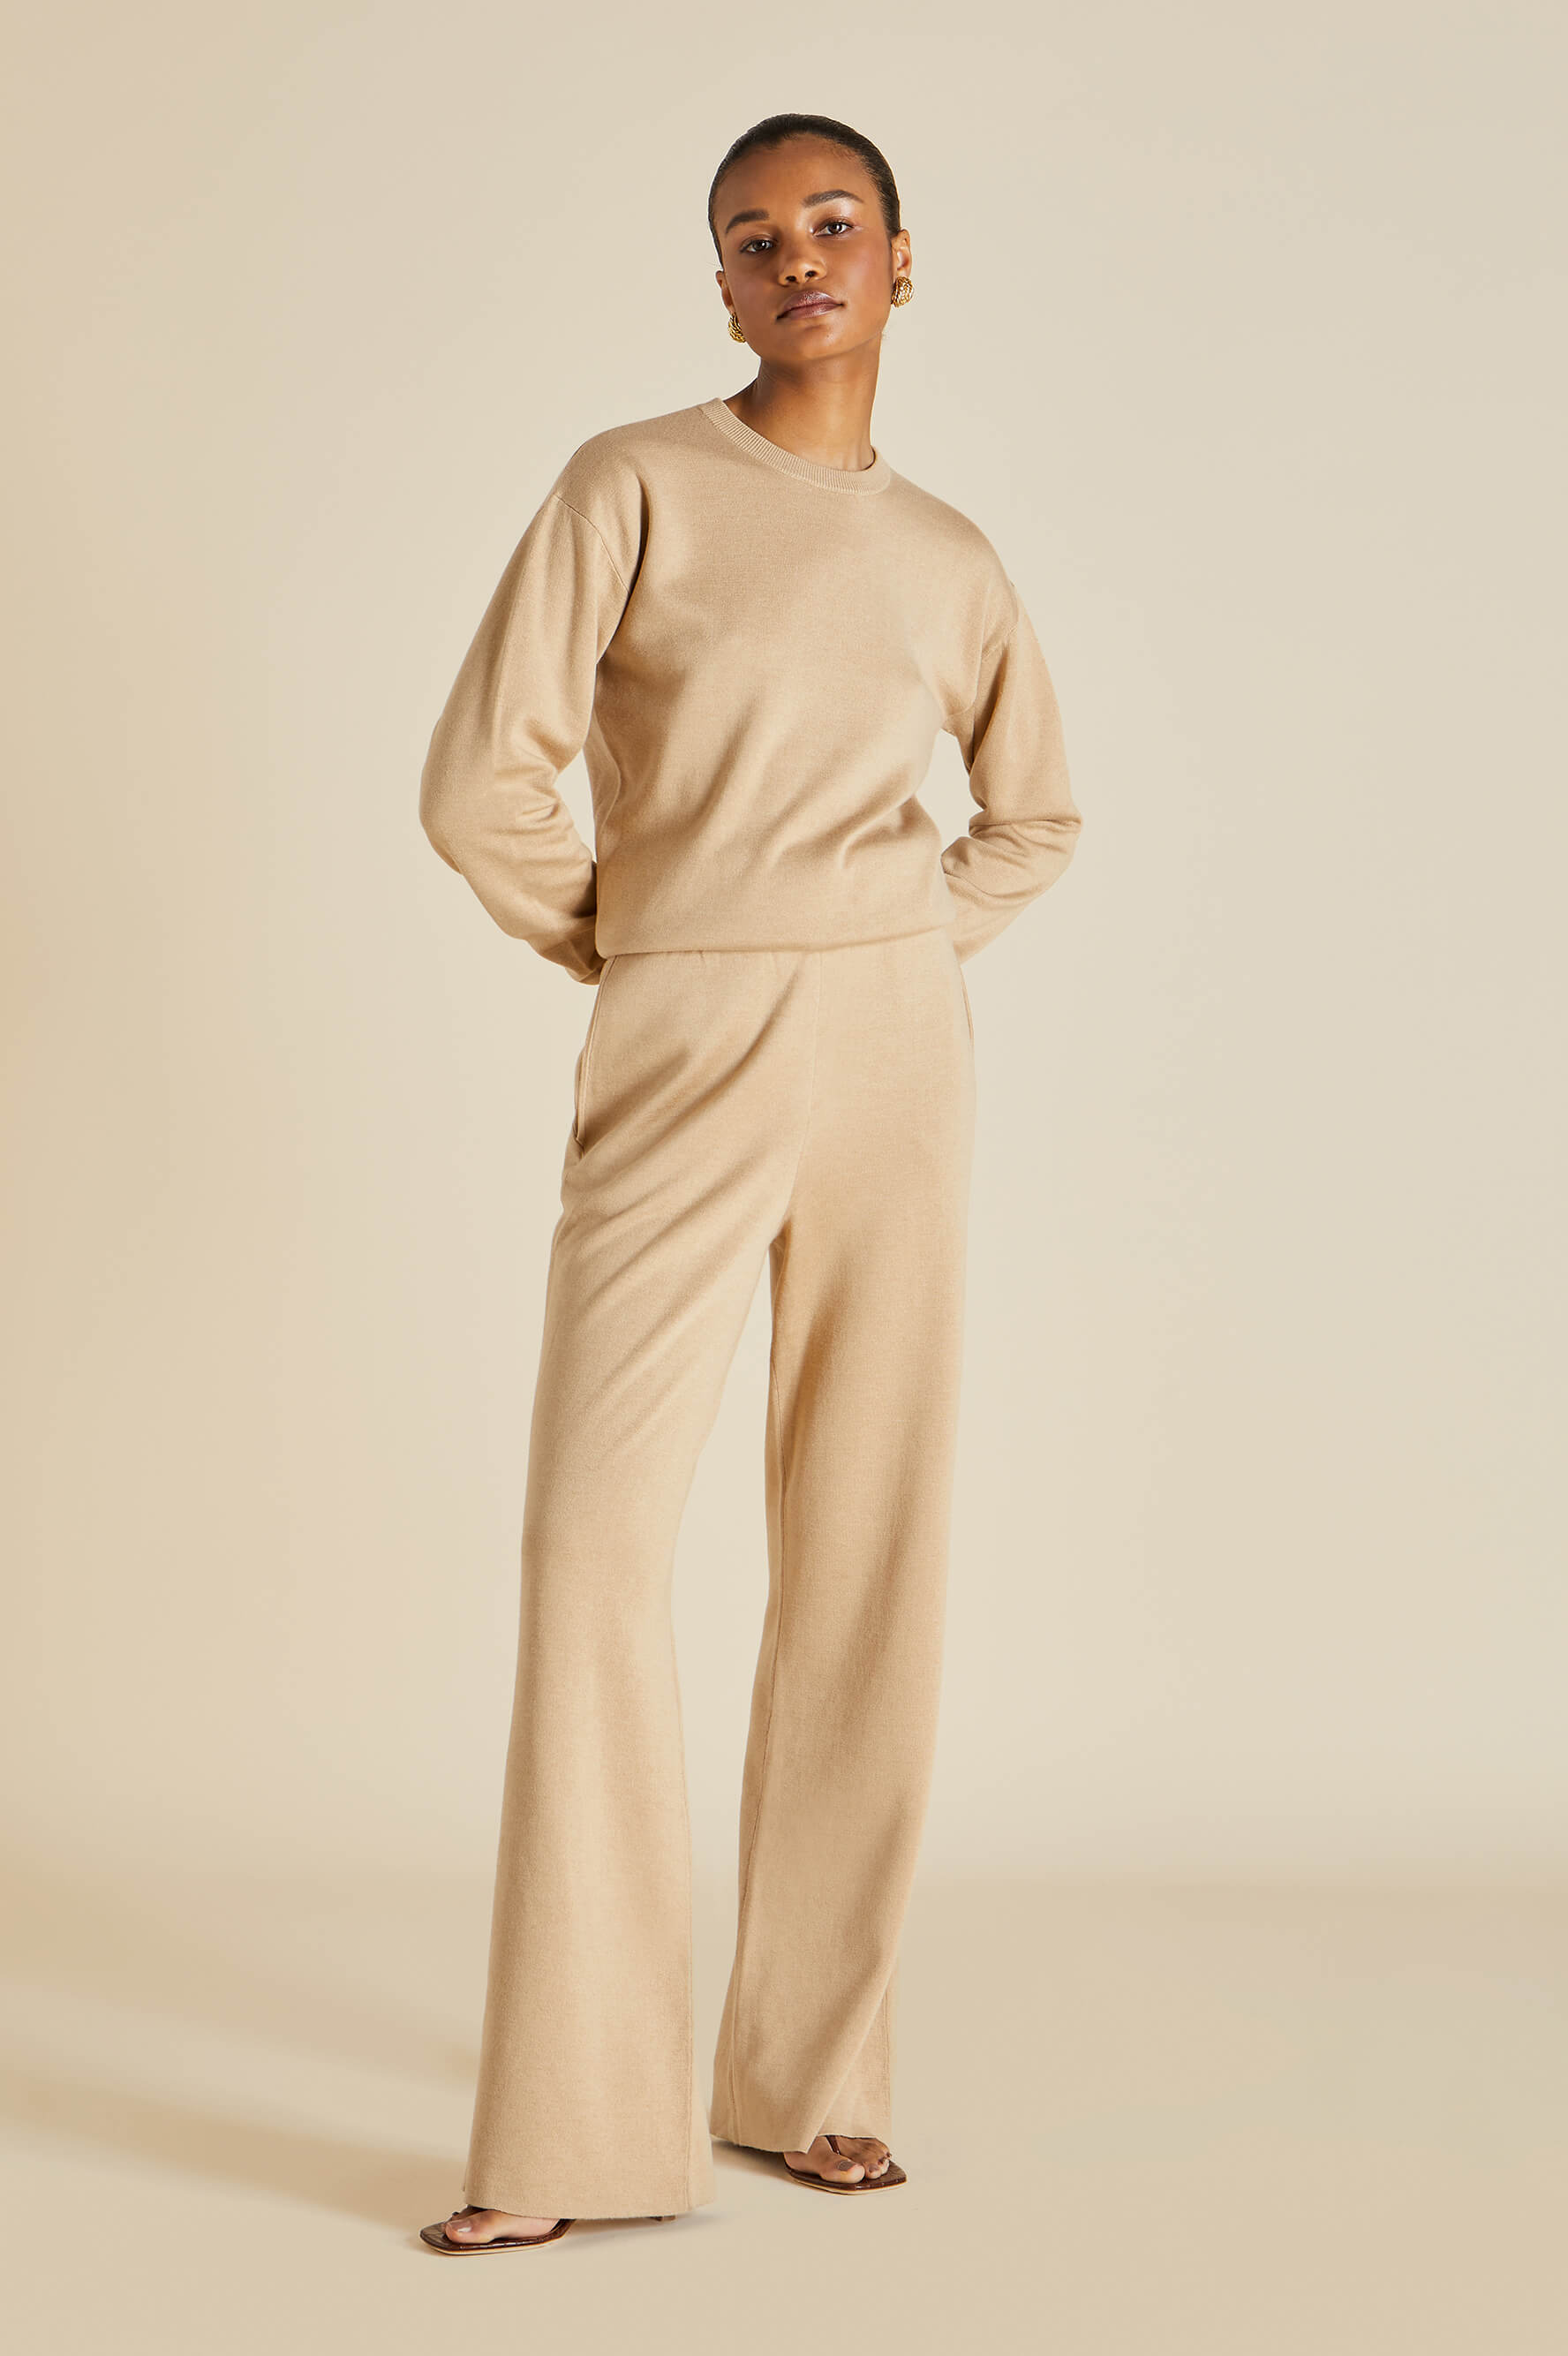 Carmel Shanghai Silk-Cashmere Tracksuit - The Ultimate In Luxury